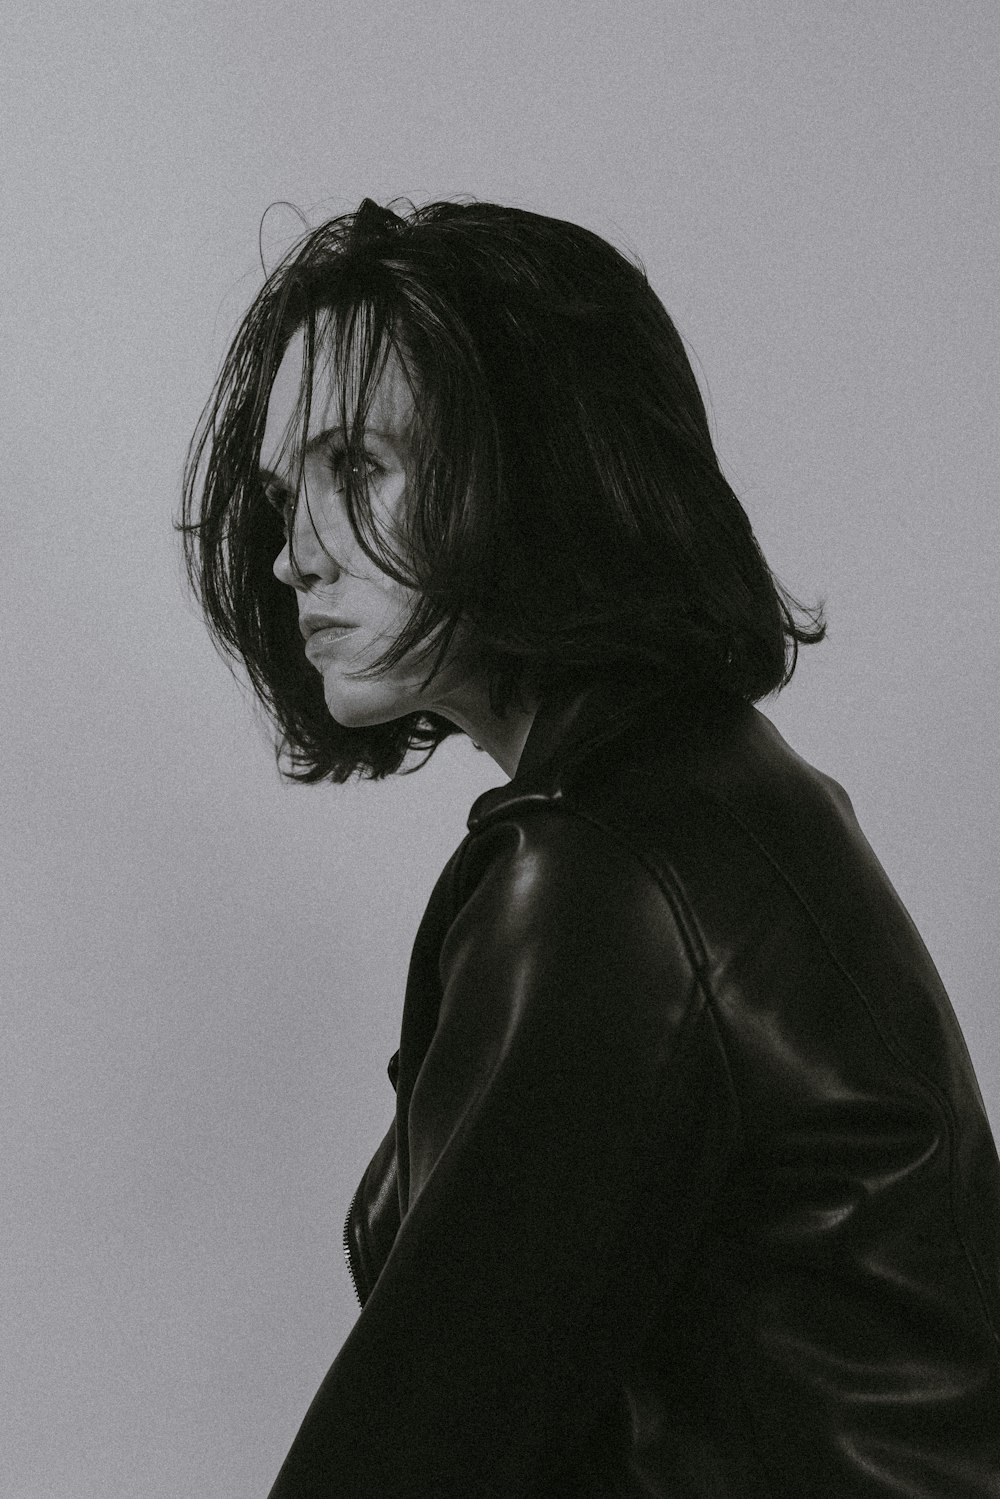 a black and white photo of a woman in a leather jacket